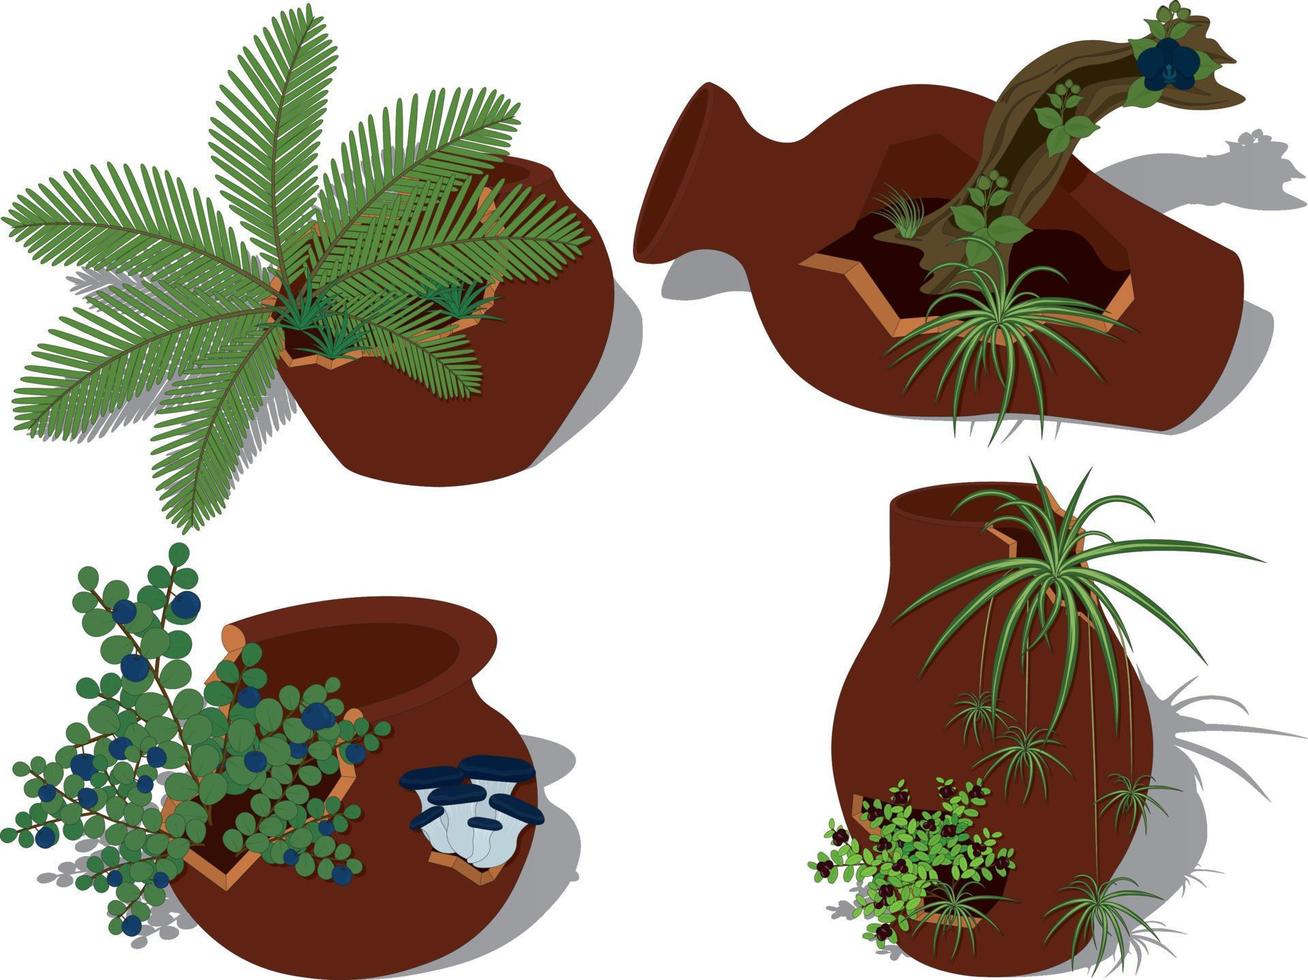 Potted plants collection, plants in cracked broken pots vector illustration